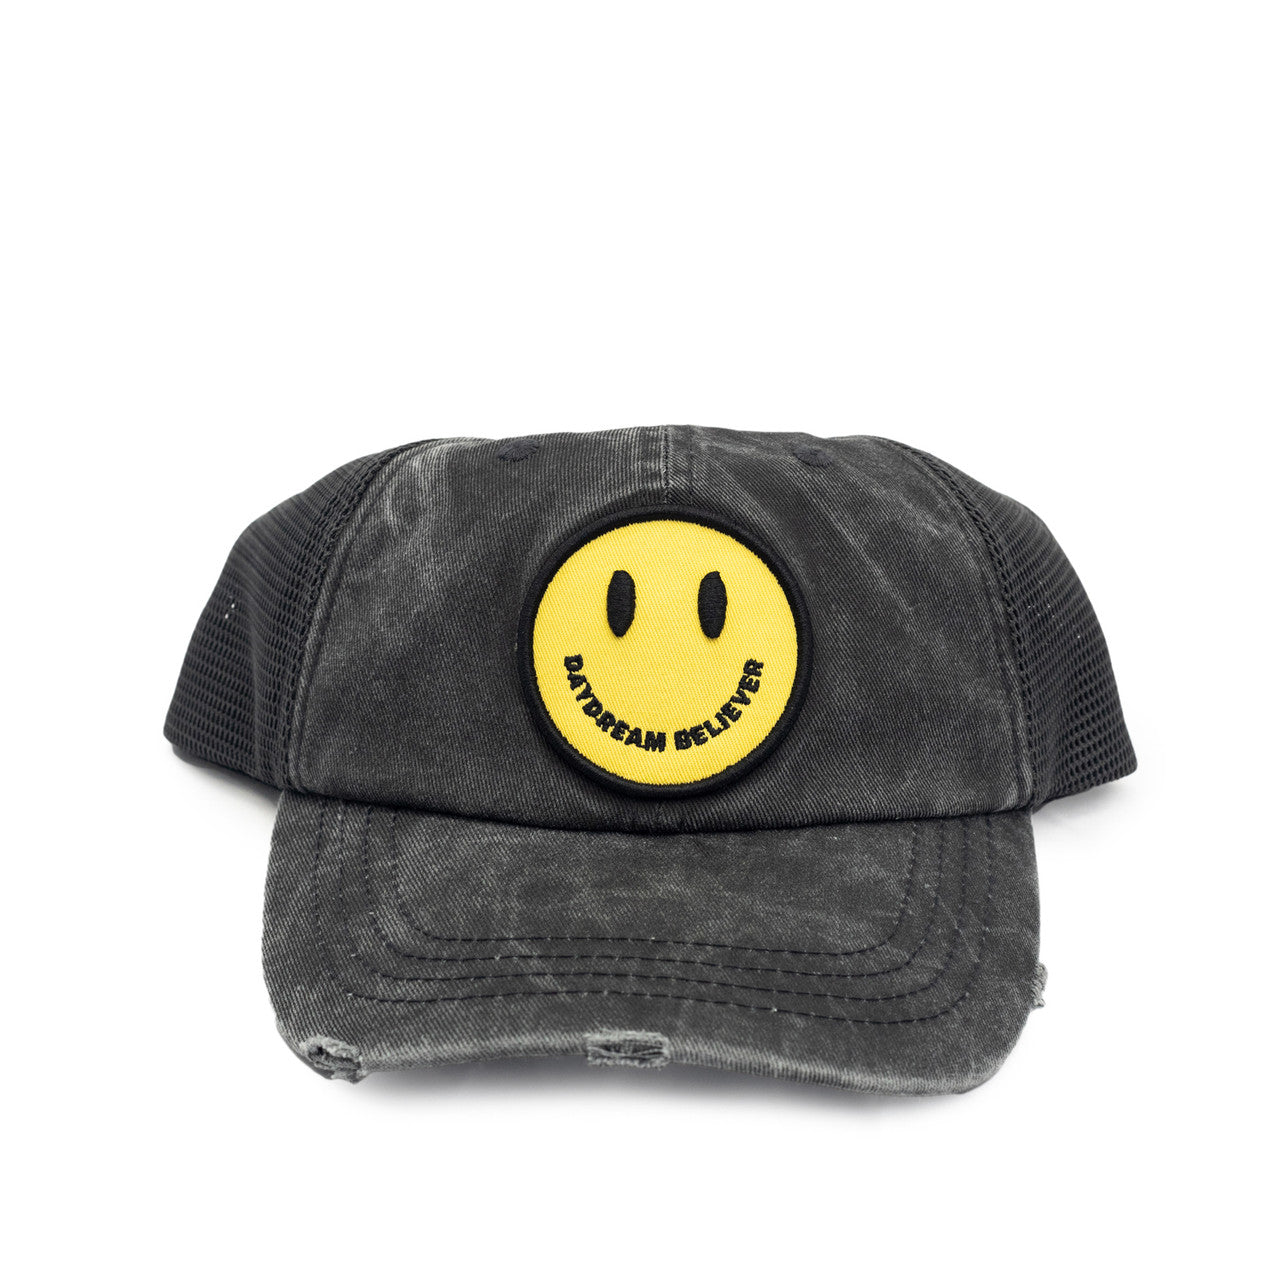 Sugarboo Smiley Hat